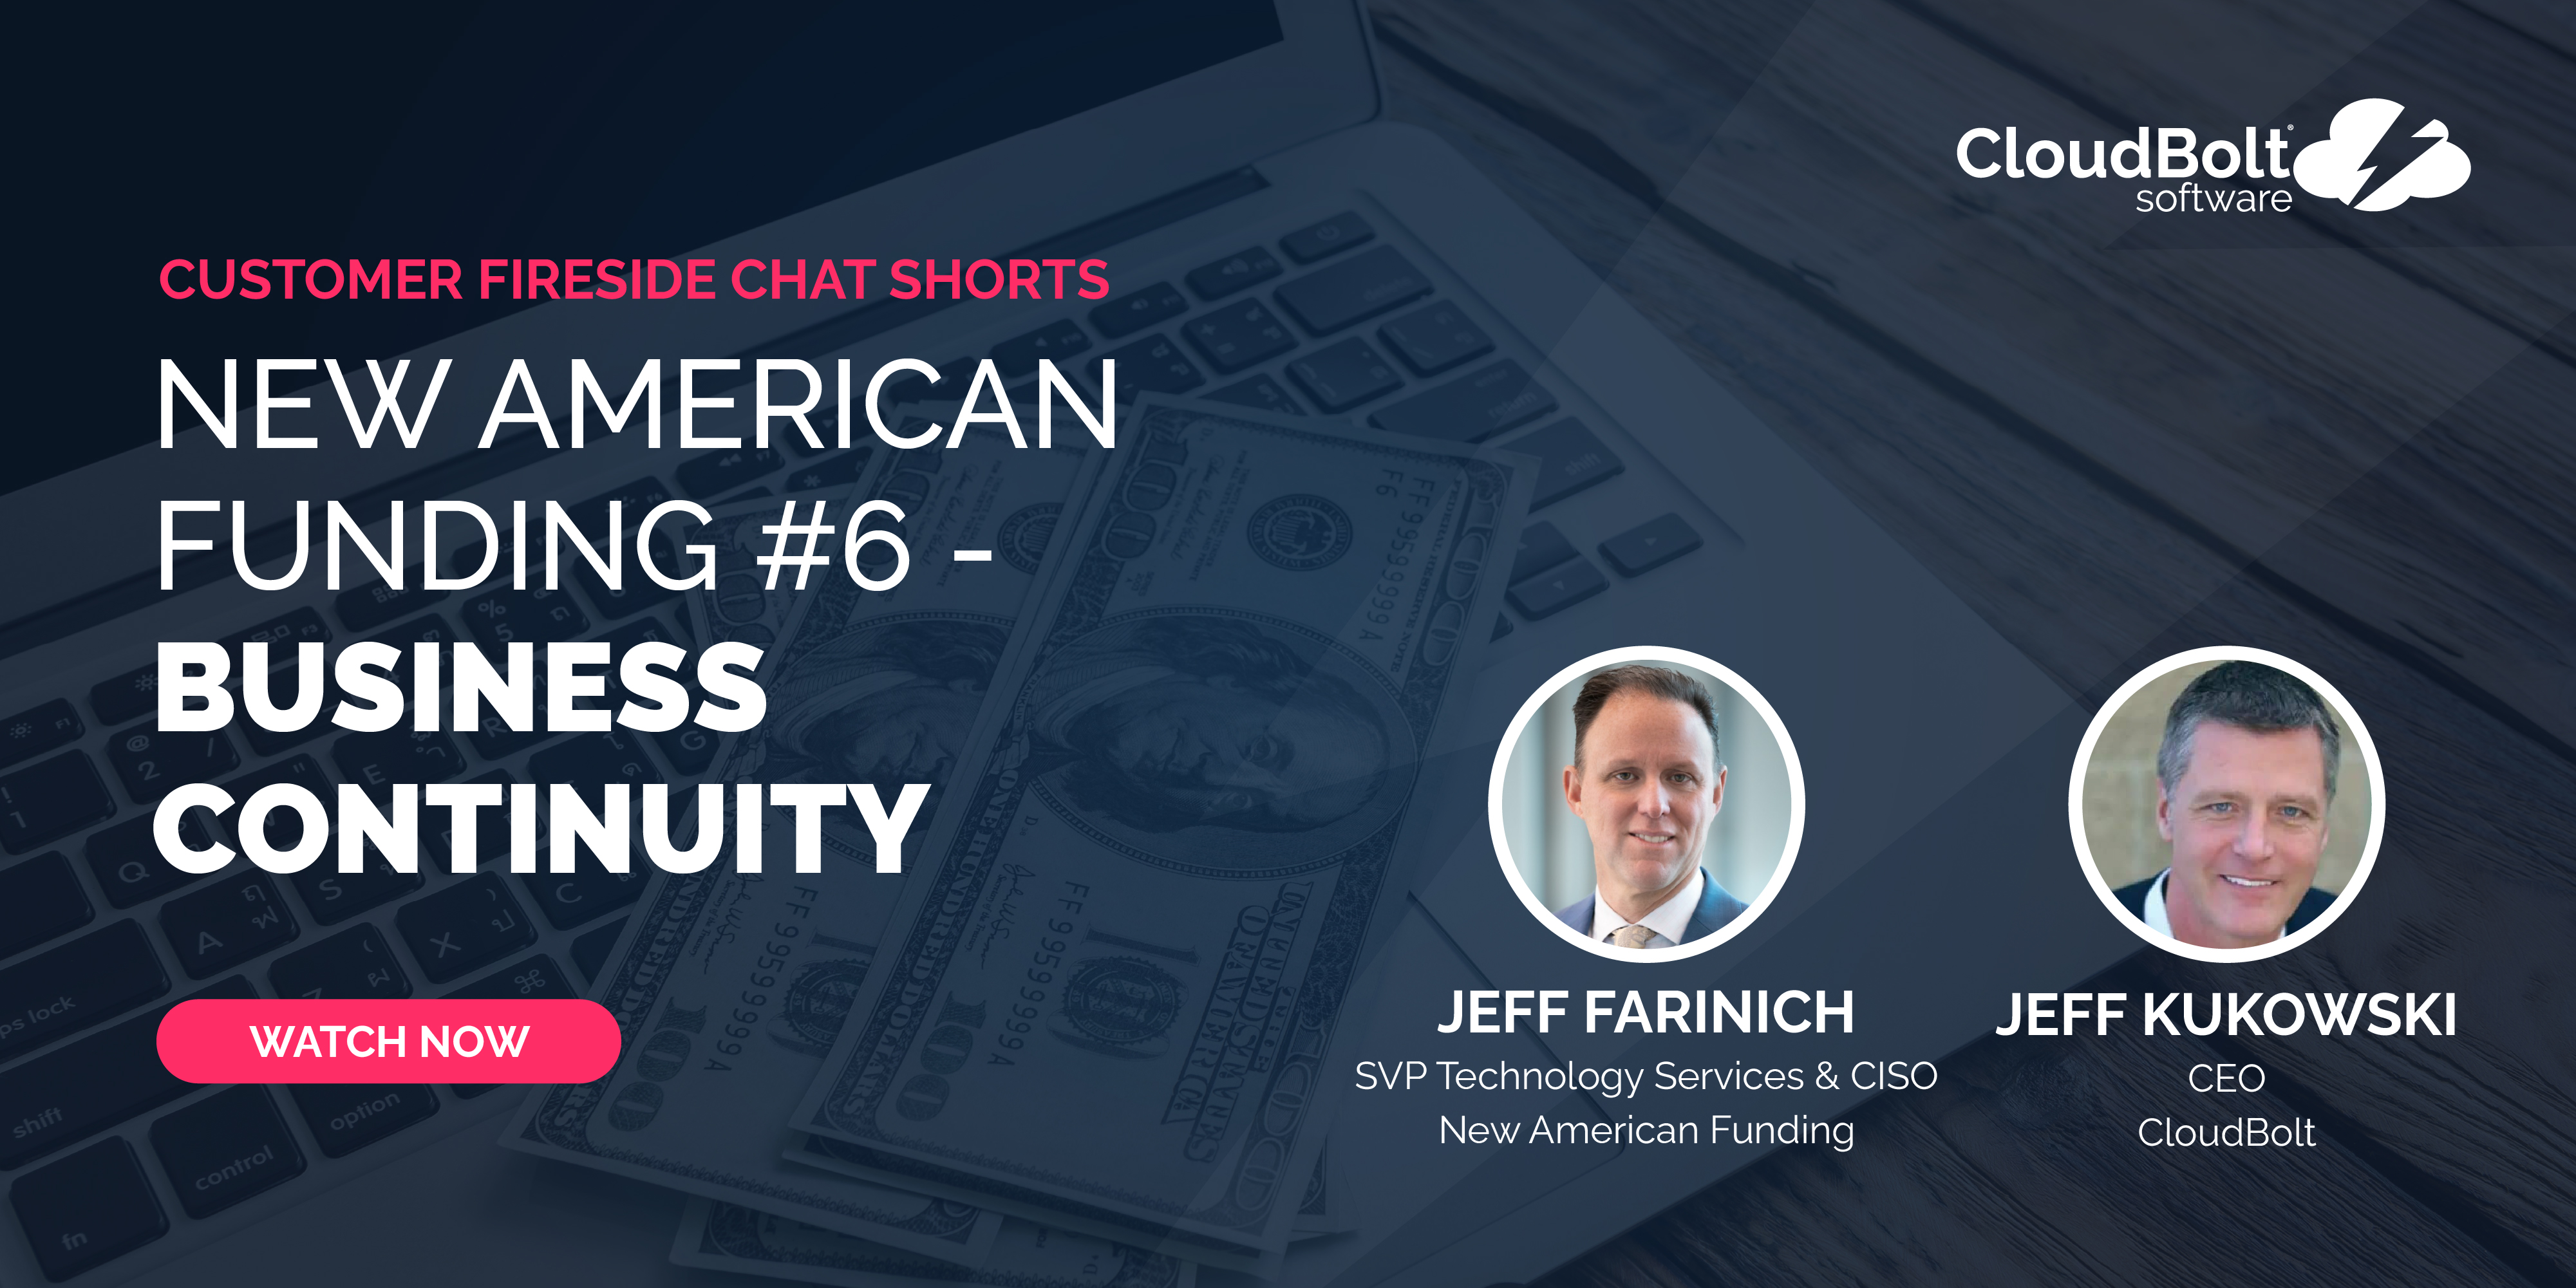 New American Funding #6—Business Continuity